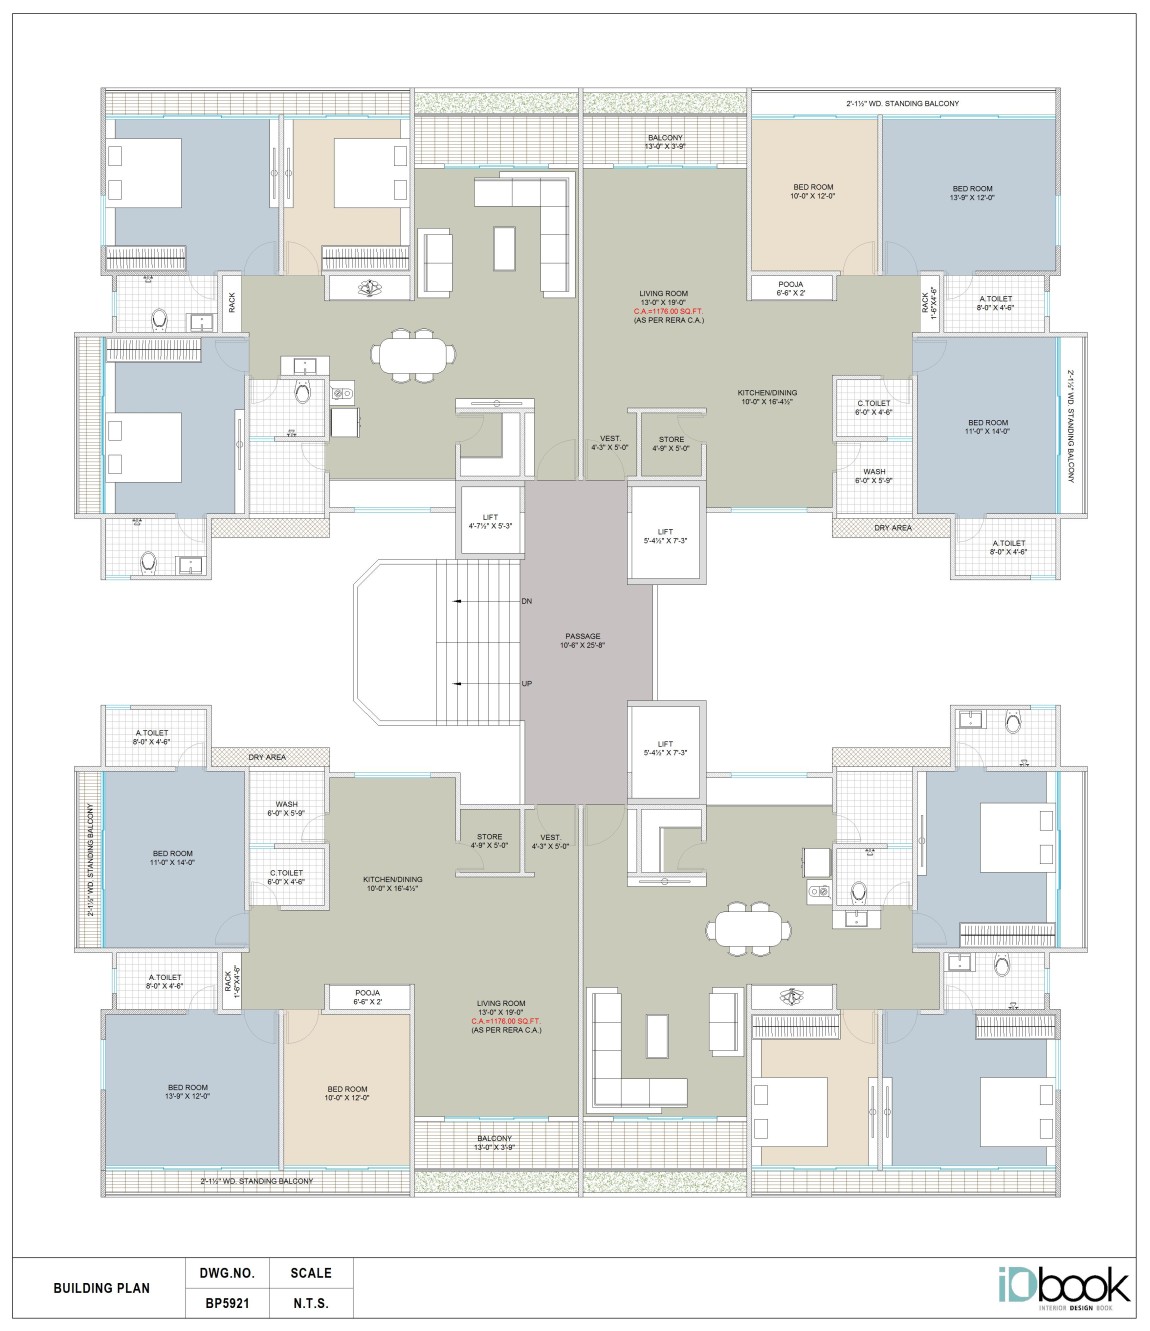 3 BHK Well Designed layout